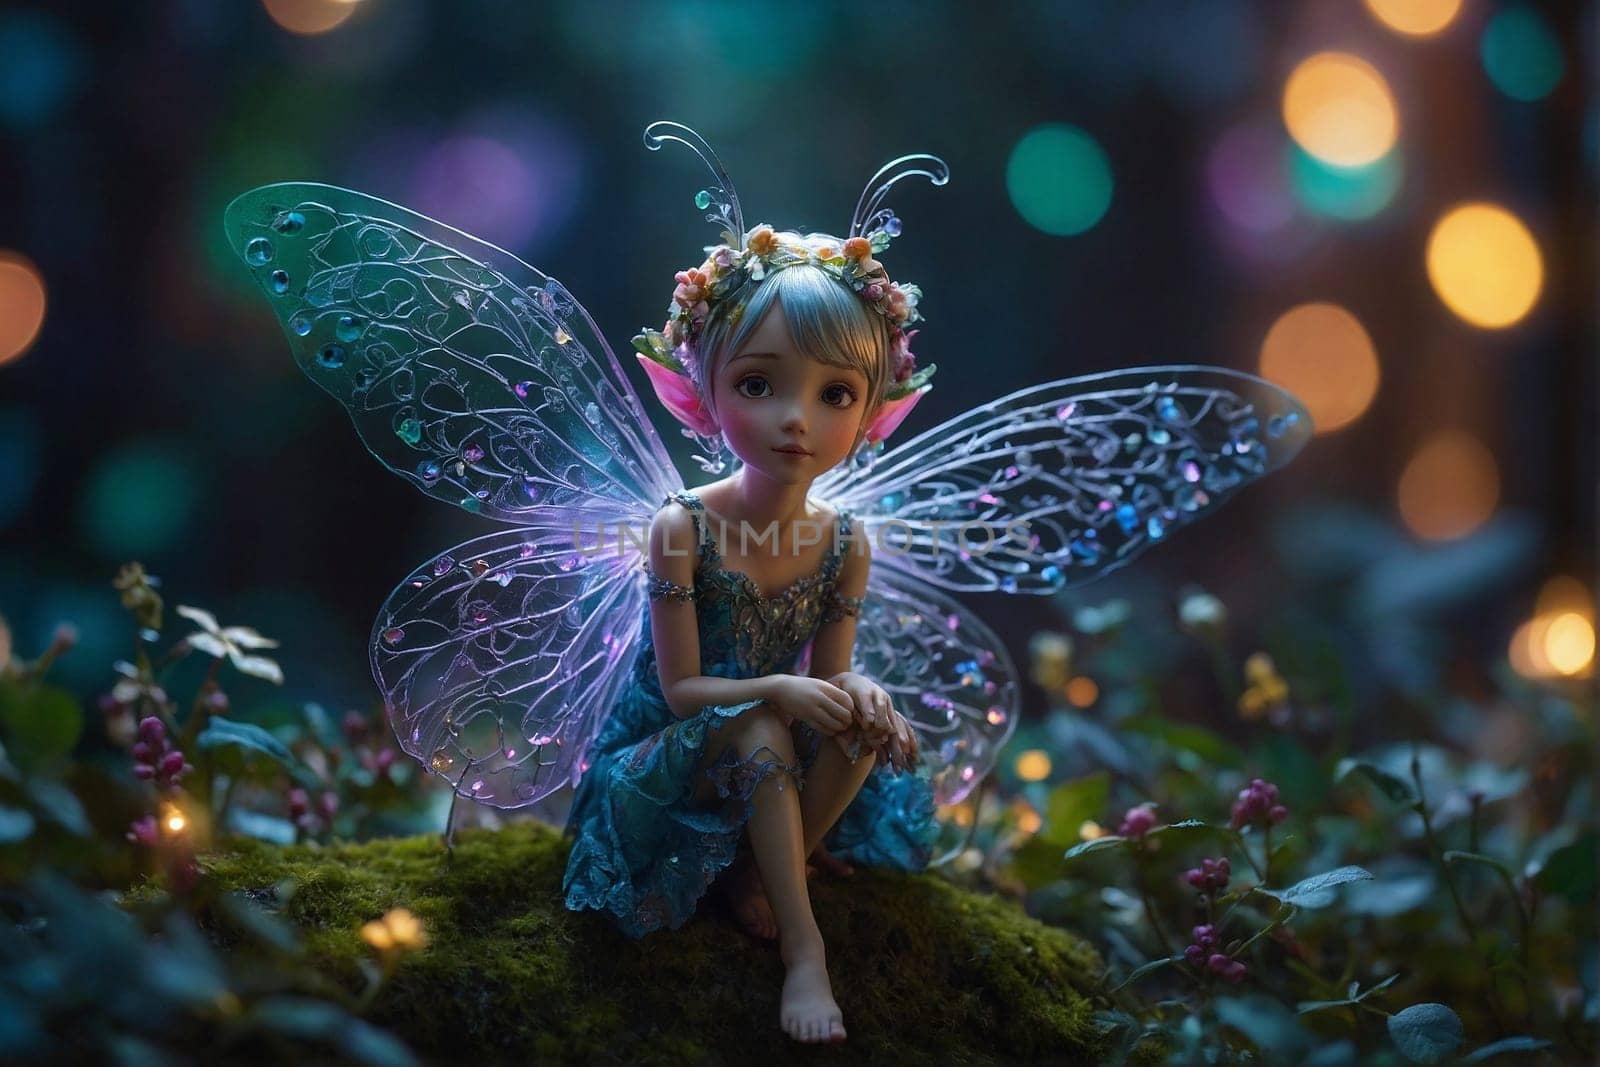 A fairy perches delicately on the vibrant green grass of a field, creating a whimsical scene.